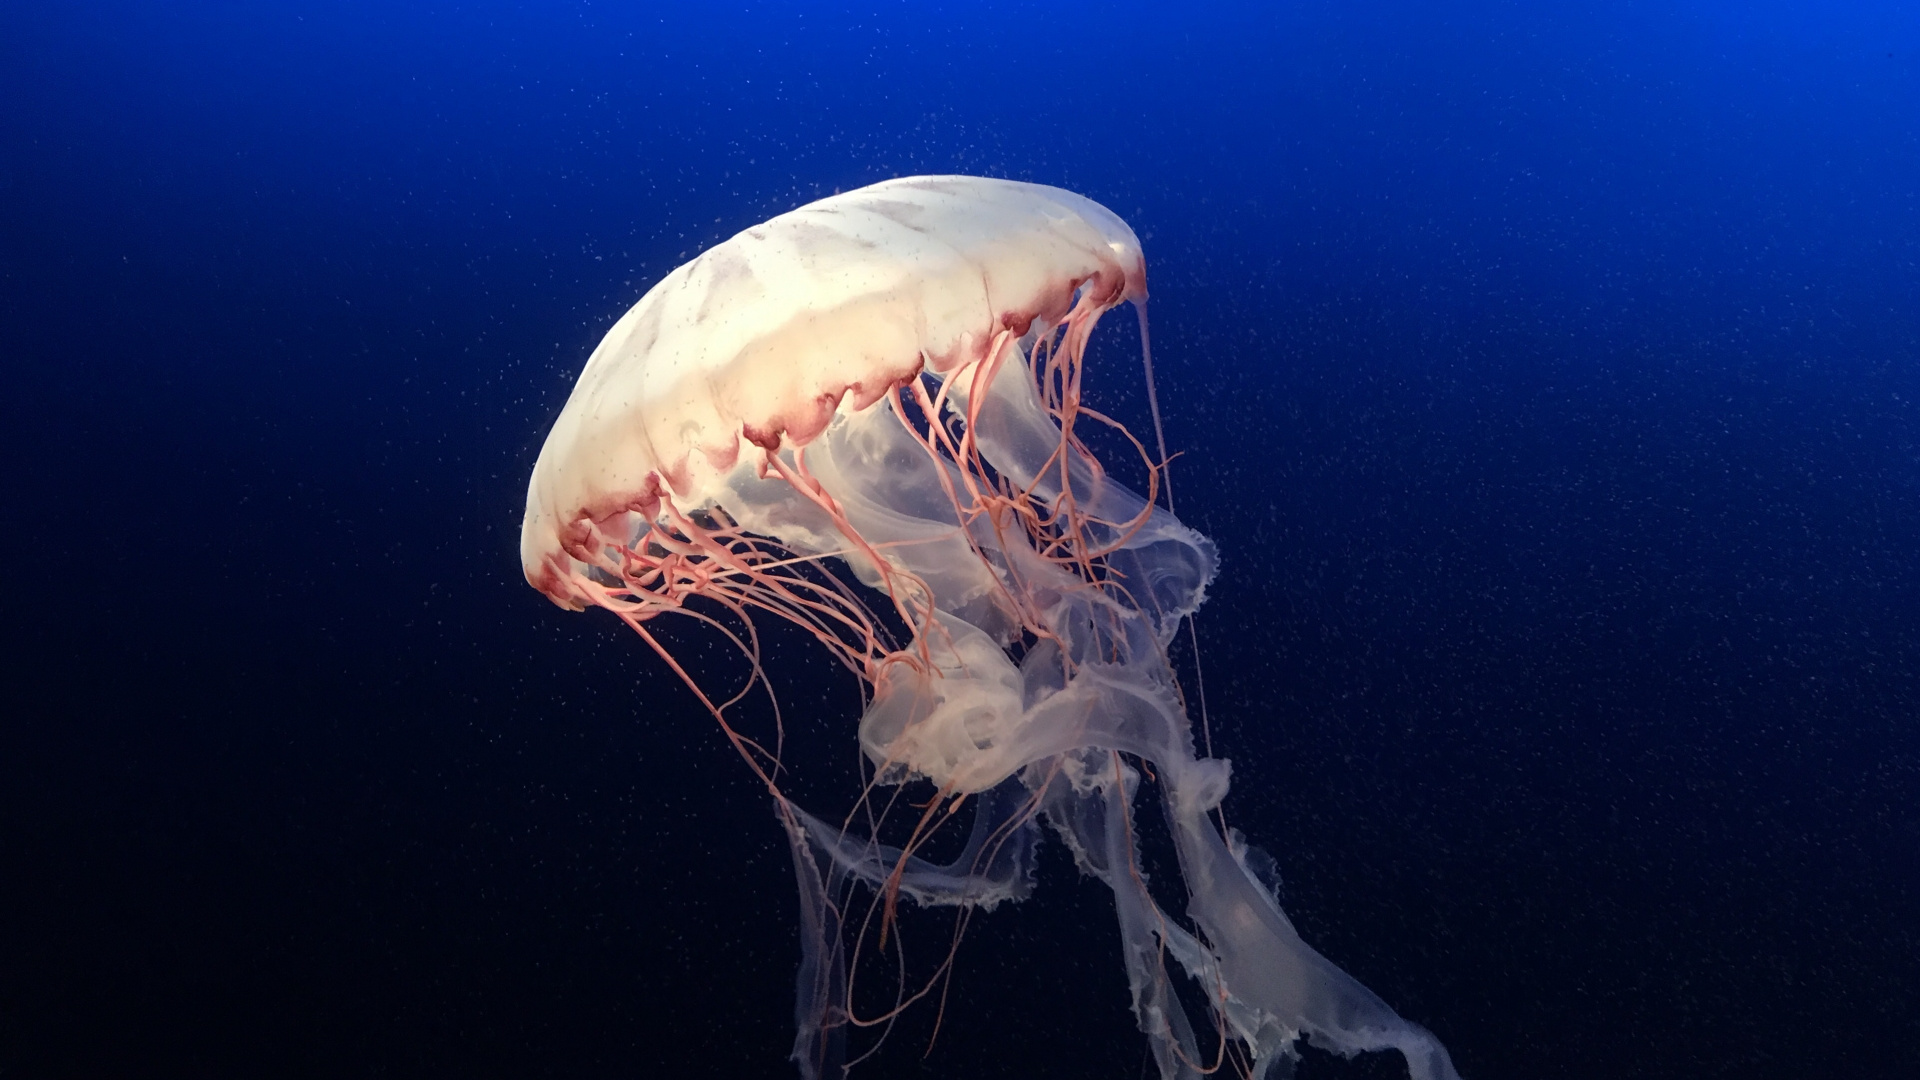 White Jellyfish in Blue Water. Wallpaper in 1920x1080 Resolution